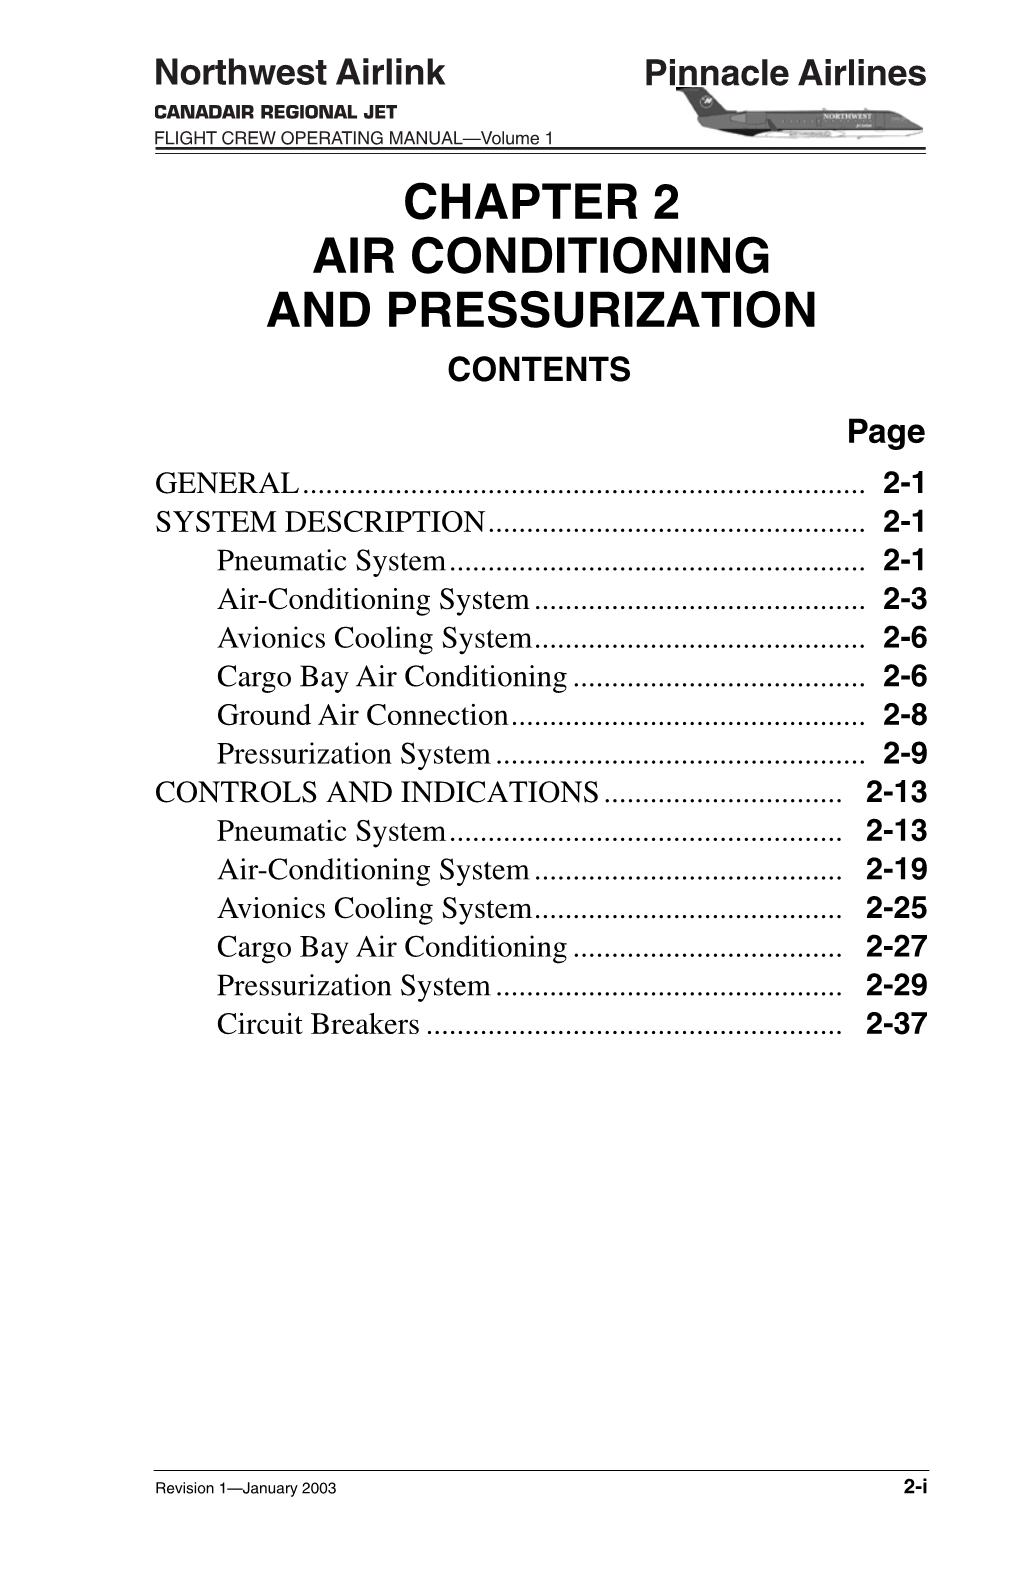 CHAPTER 2 AIR CONDITIONING and PRESSURIZATION CONTENTS Page GENERAL